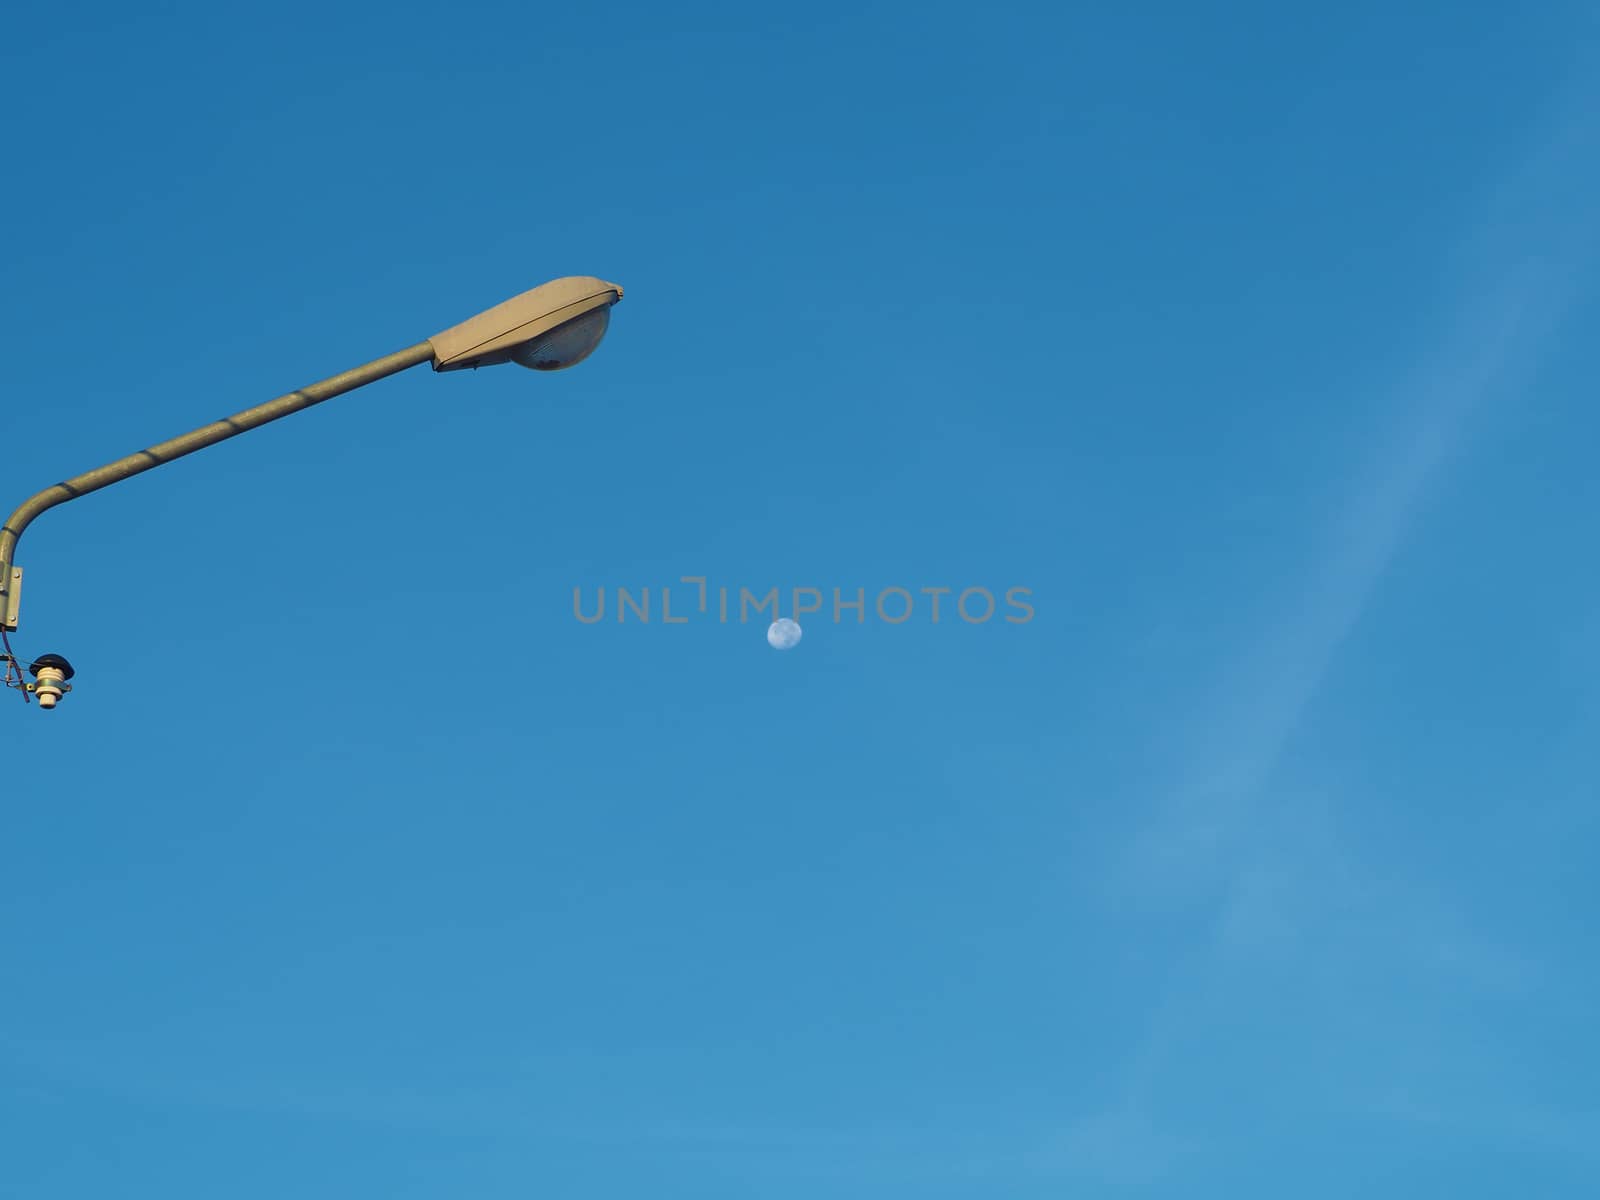 The street light tower on the background is blue sky And there is a small moon in the middle
Energy and nature concepts.
Minimal image.